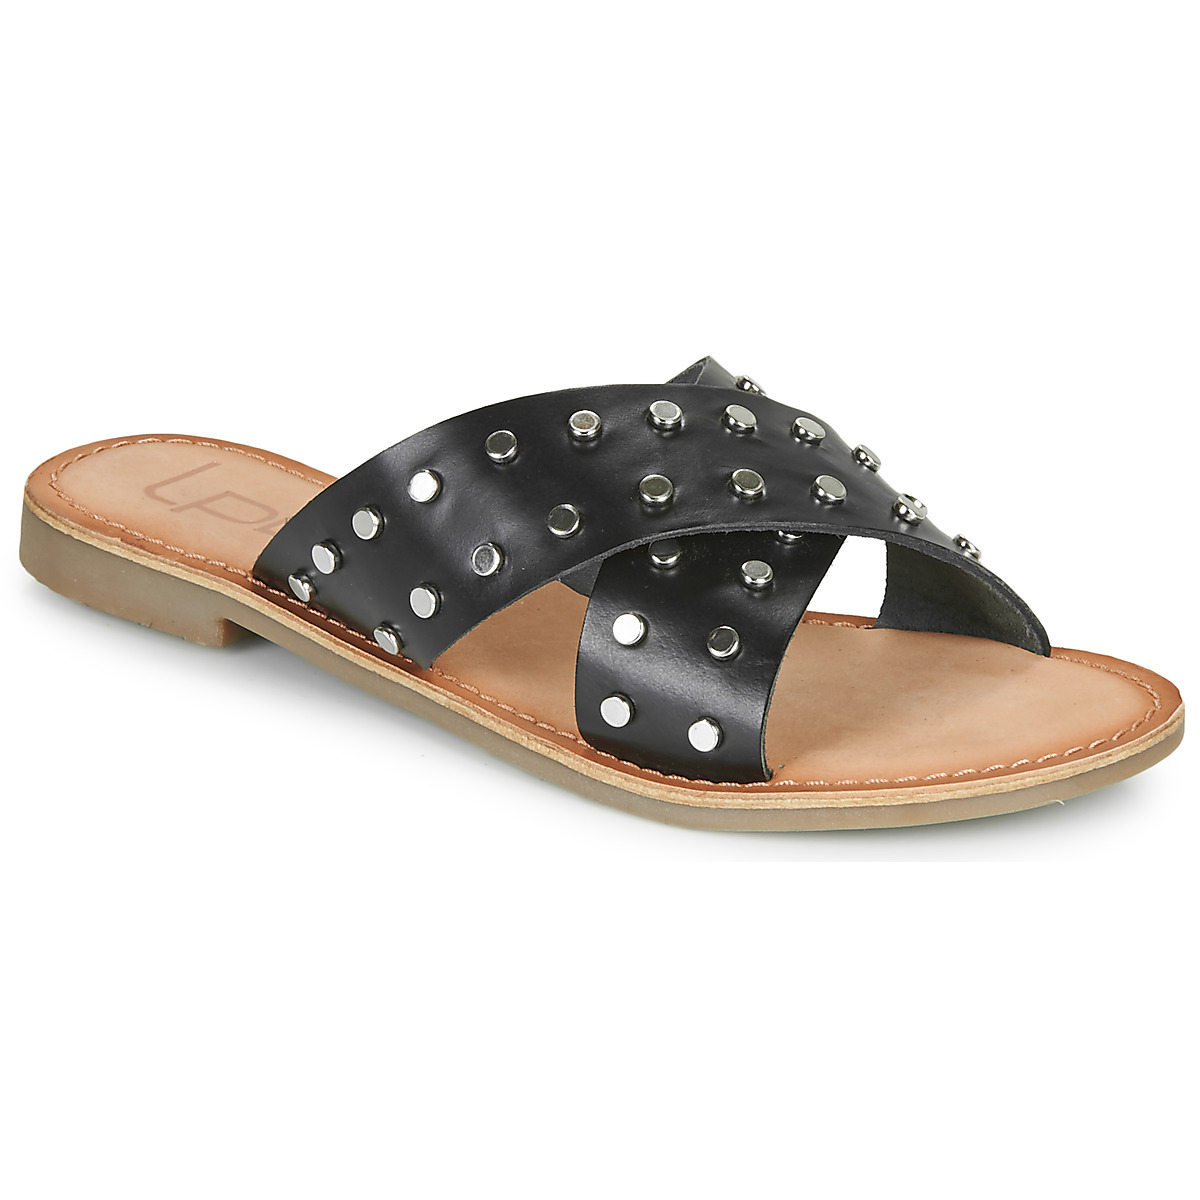 Spartoo - Slippers in Black Les Petites Bombes Woman GOOFASH